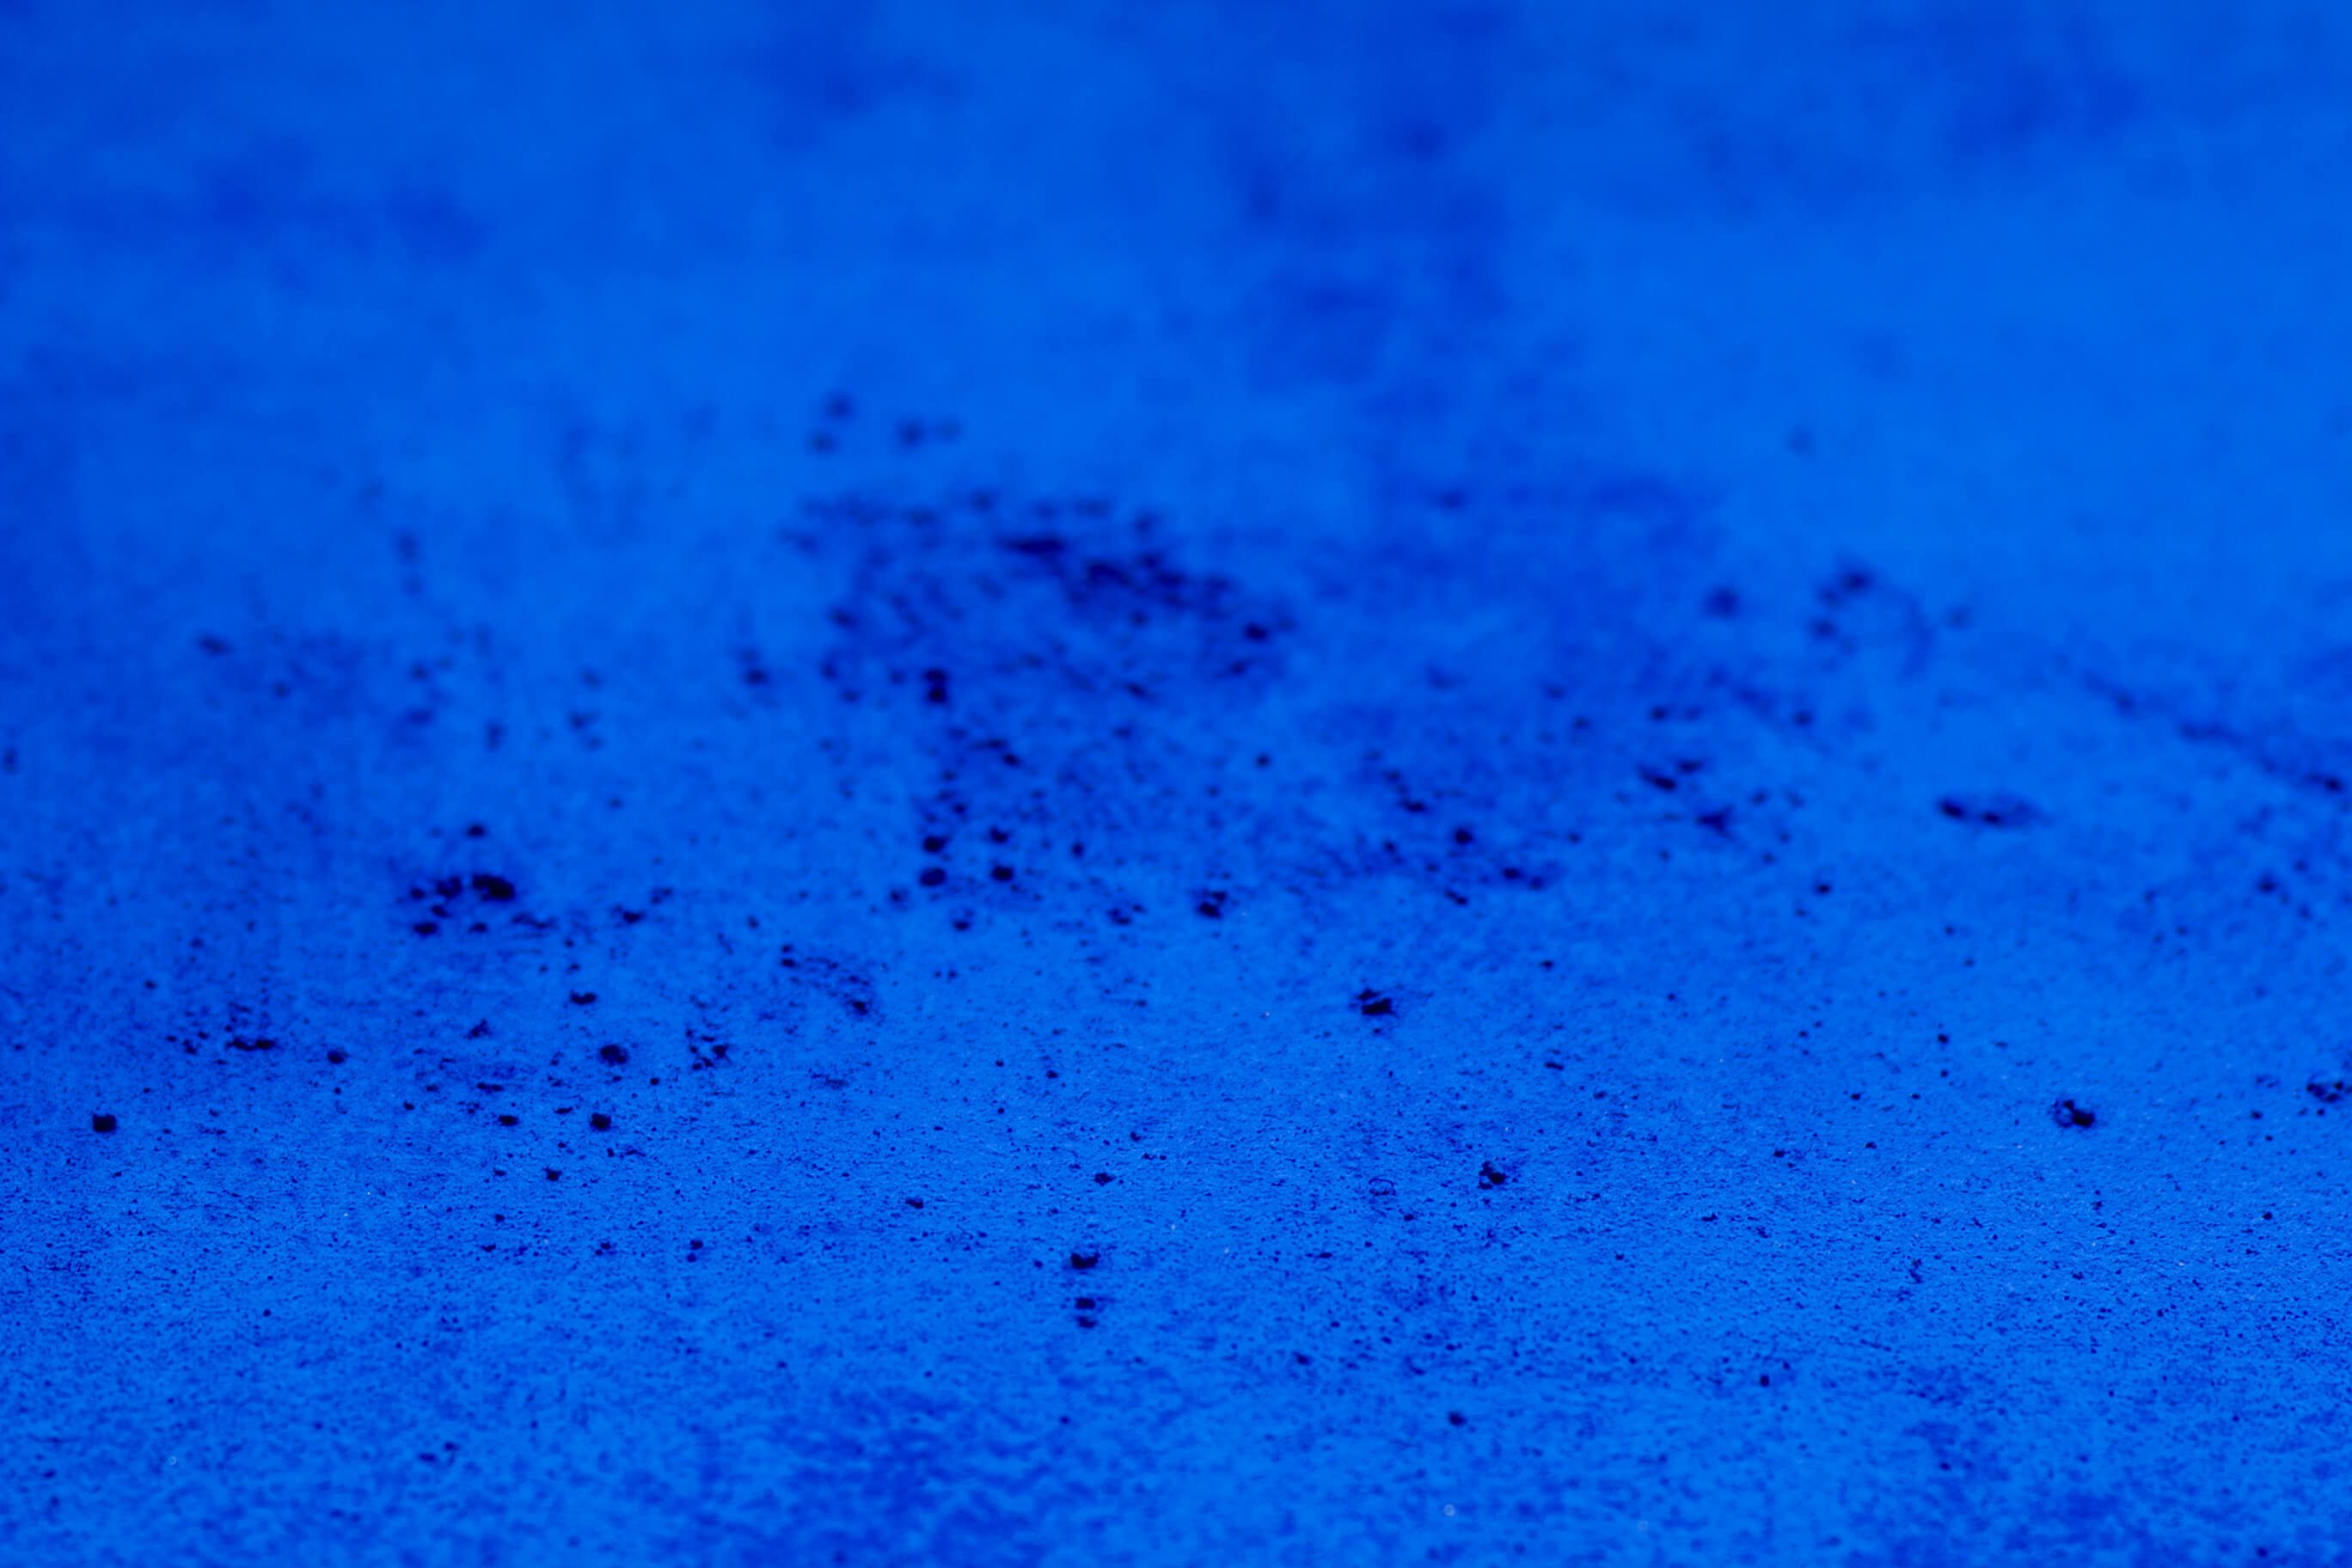 yves-klein-blue-painting